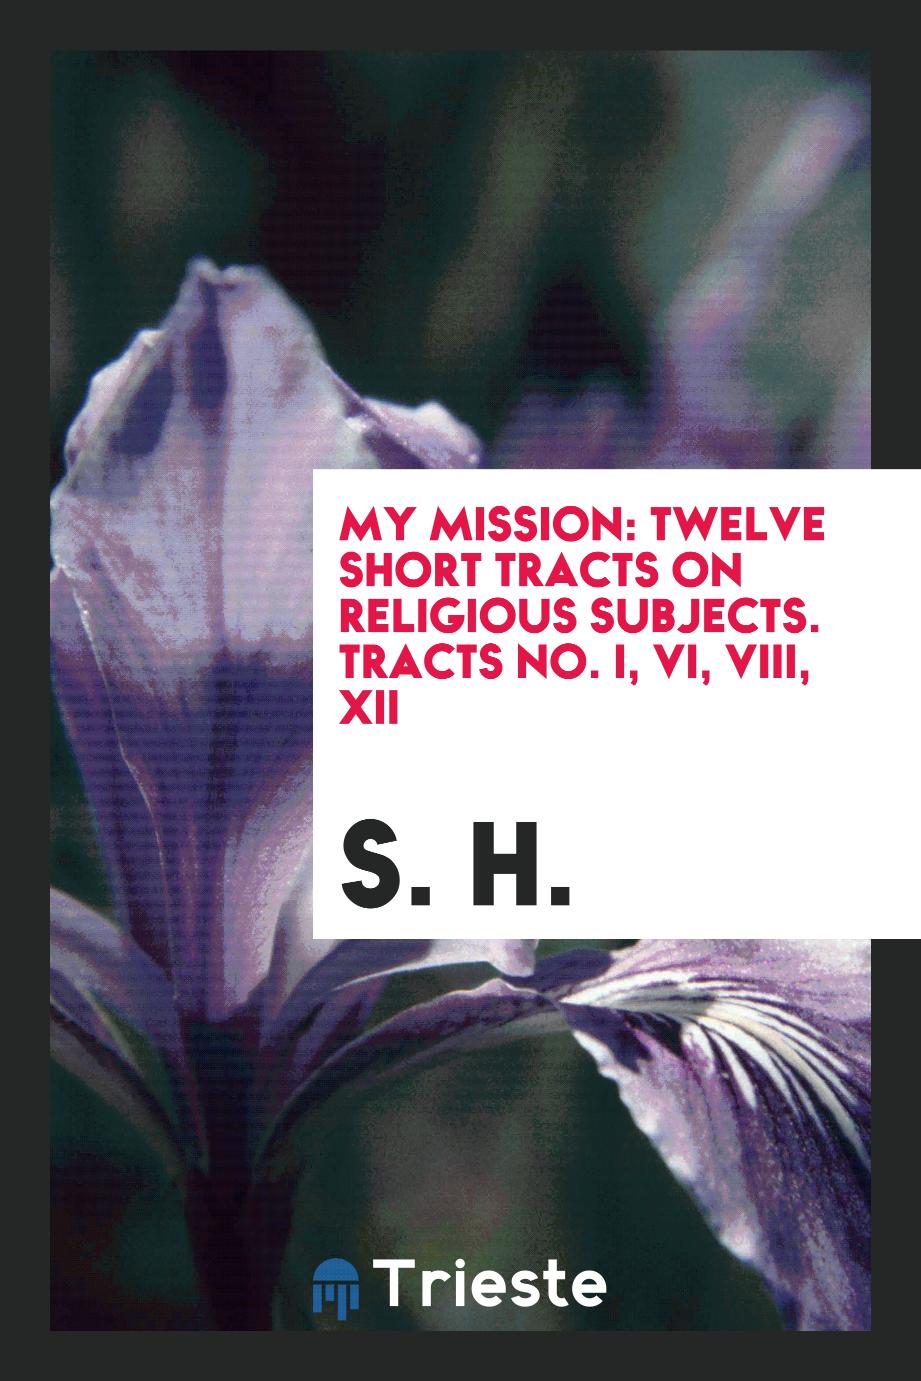 My mission: twelve short tracts on religious subjects. Tracts No. I, VI, VIII, XII